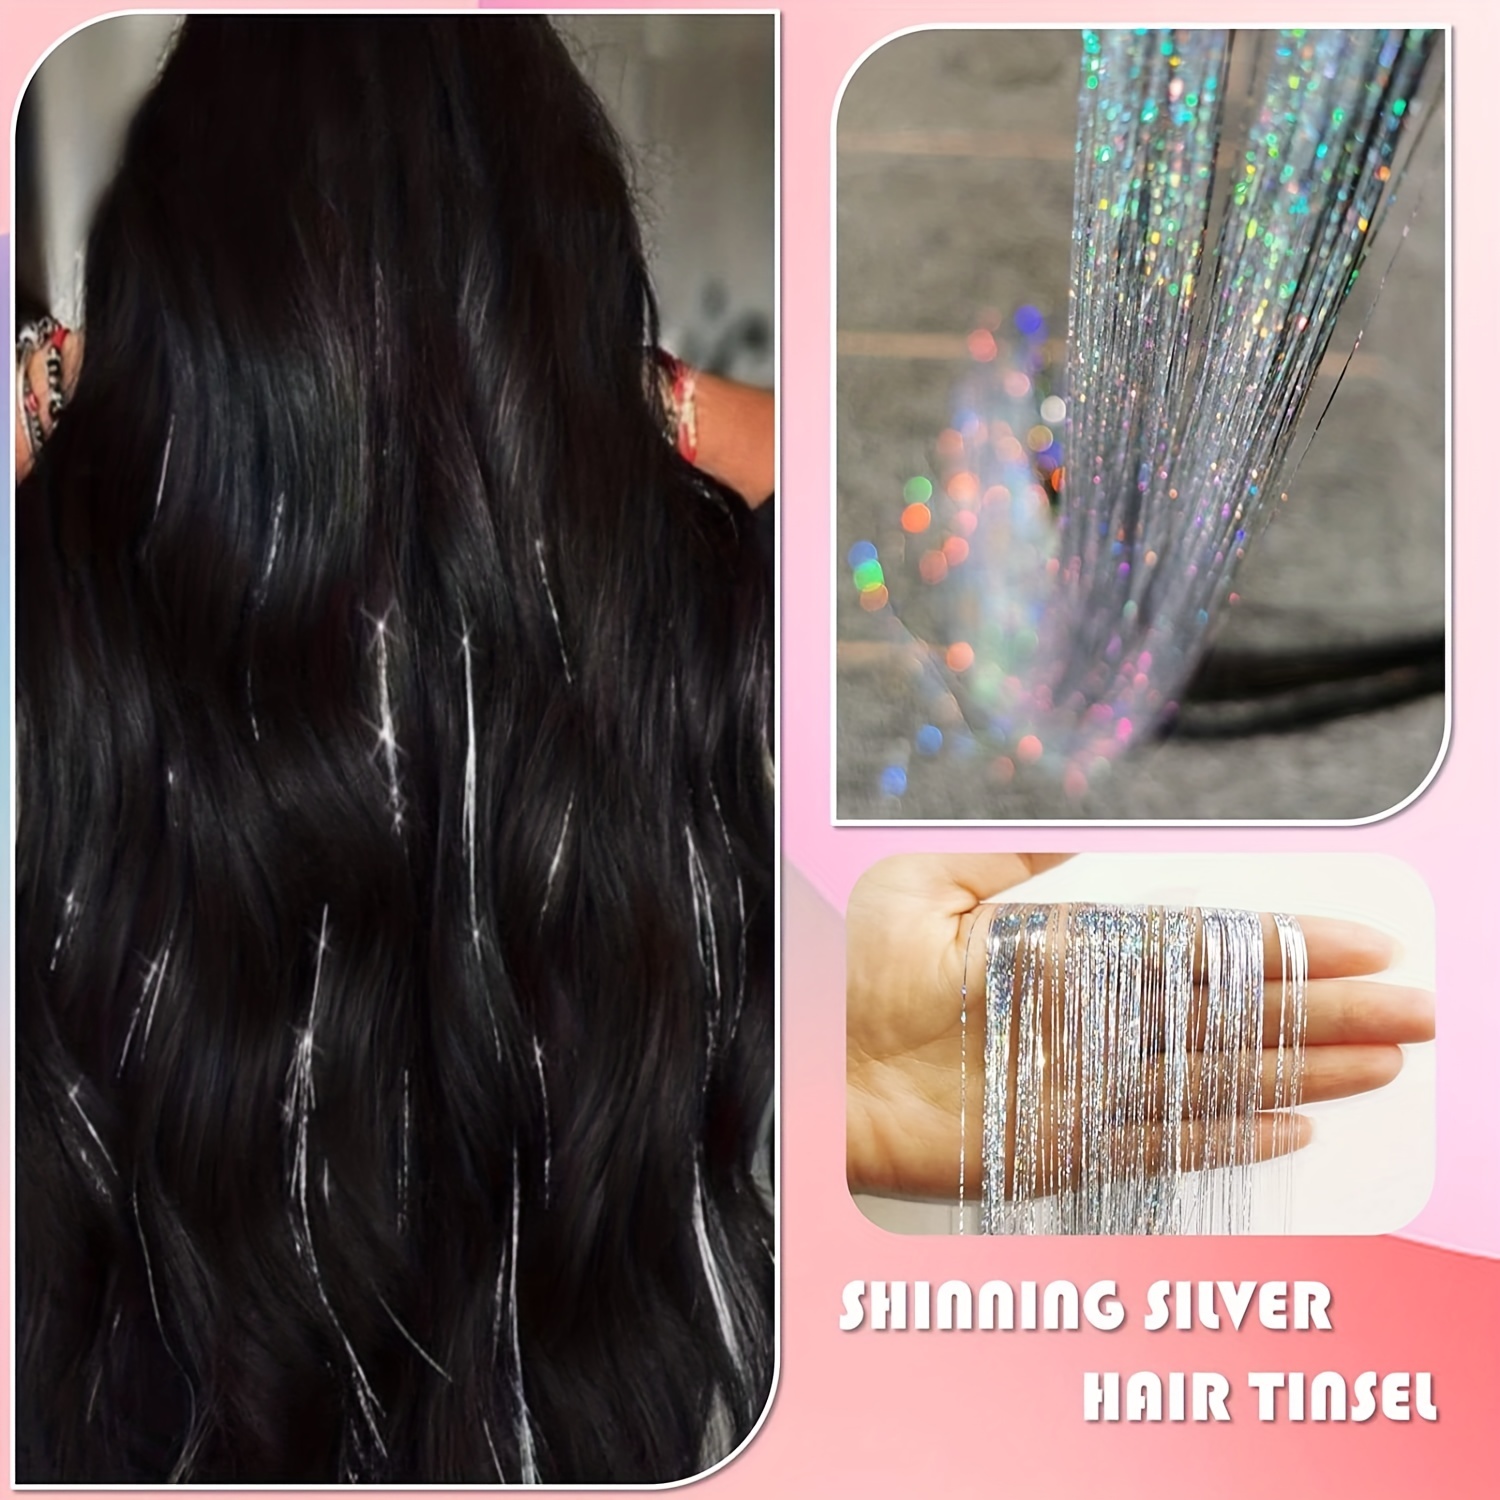  Silver Pink Hair Tinsel Kit With Tools 8pcs 1600 Strands  Glitter Tinsel Hair Extensions Heat Resistant Highlights Sparkling Fairy  Hair for Women Girls : Beauty & Personal Care